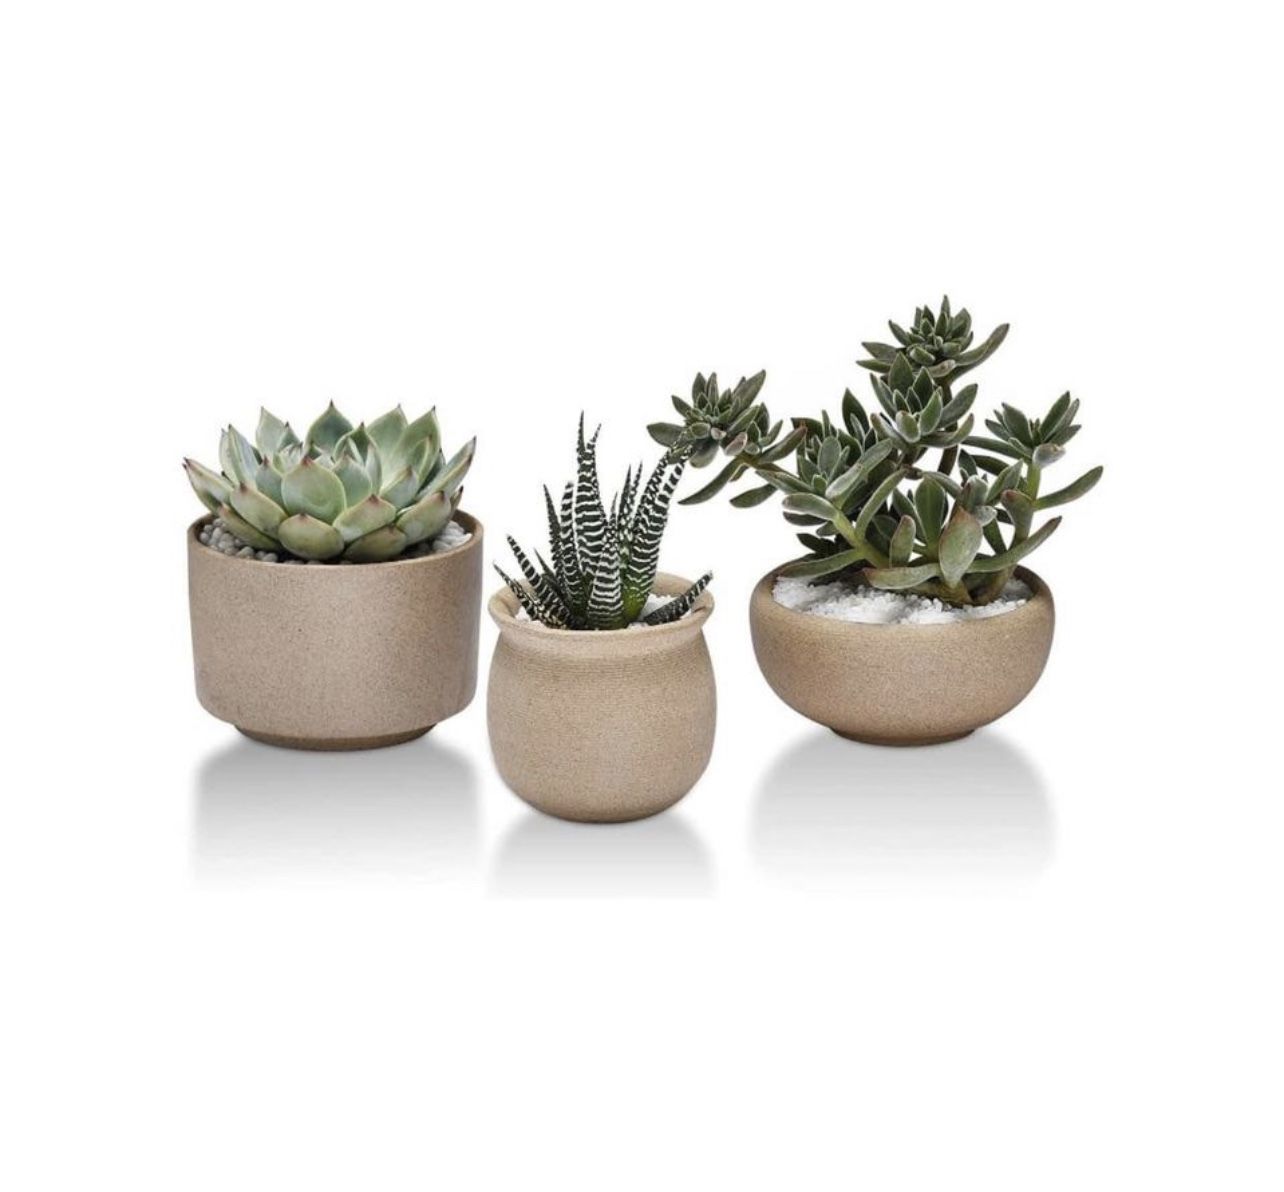 🌸 $10 Brand New In Box 3 Pack Ceramic Plant Pots (plant Not Include)